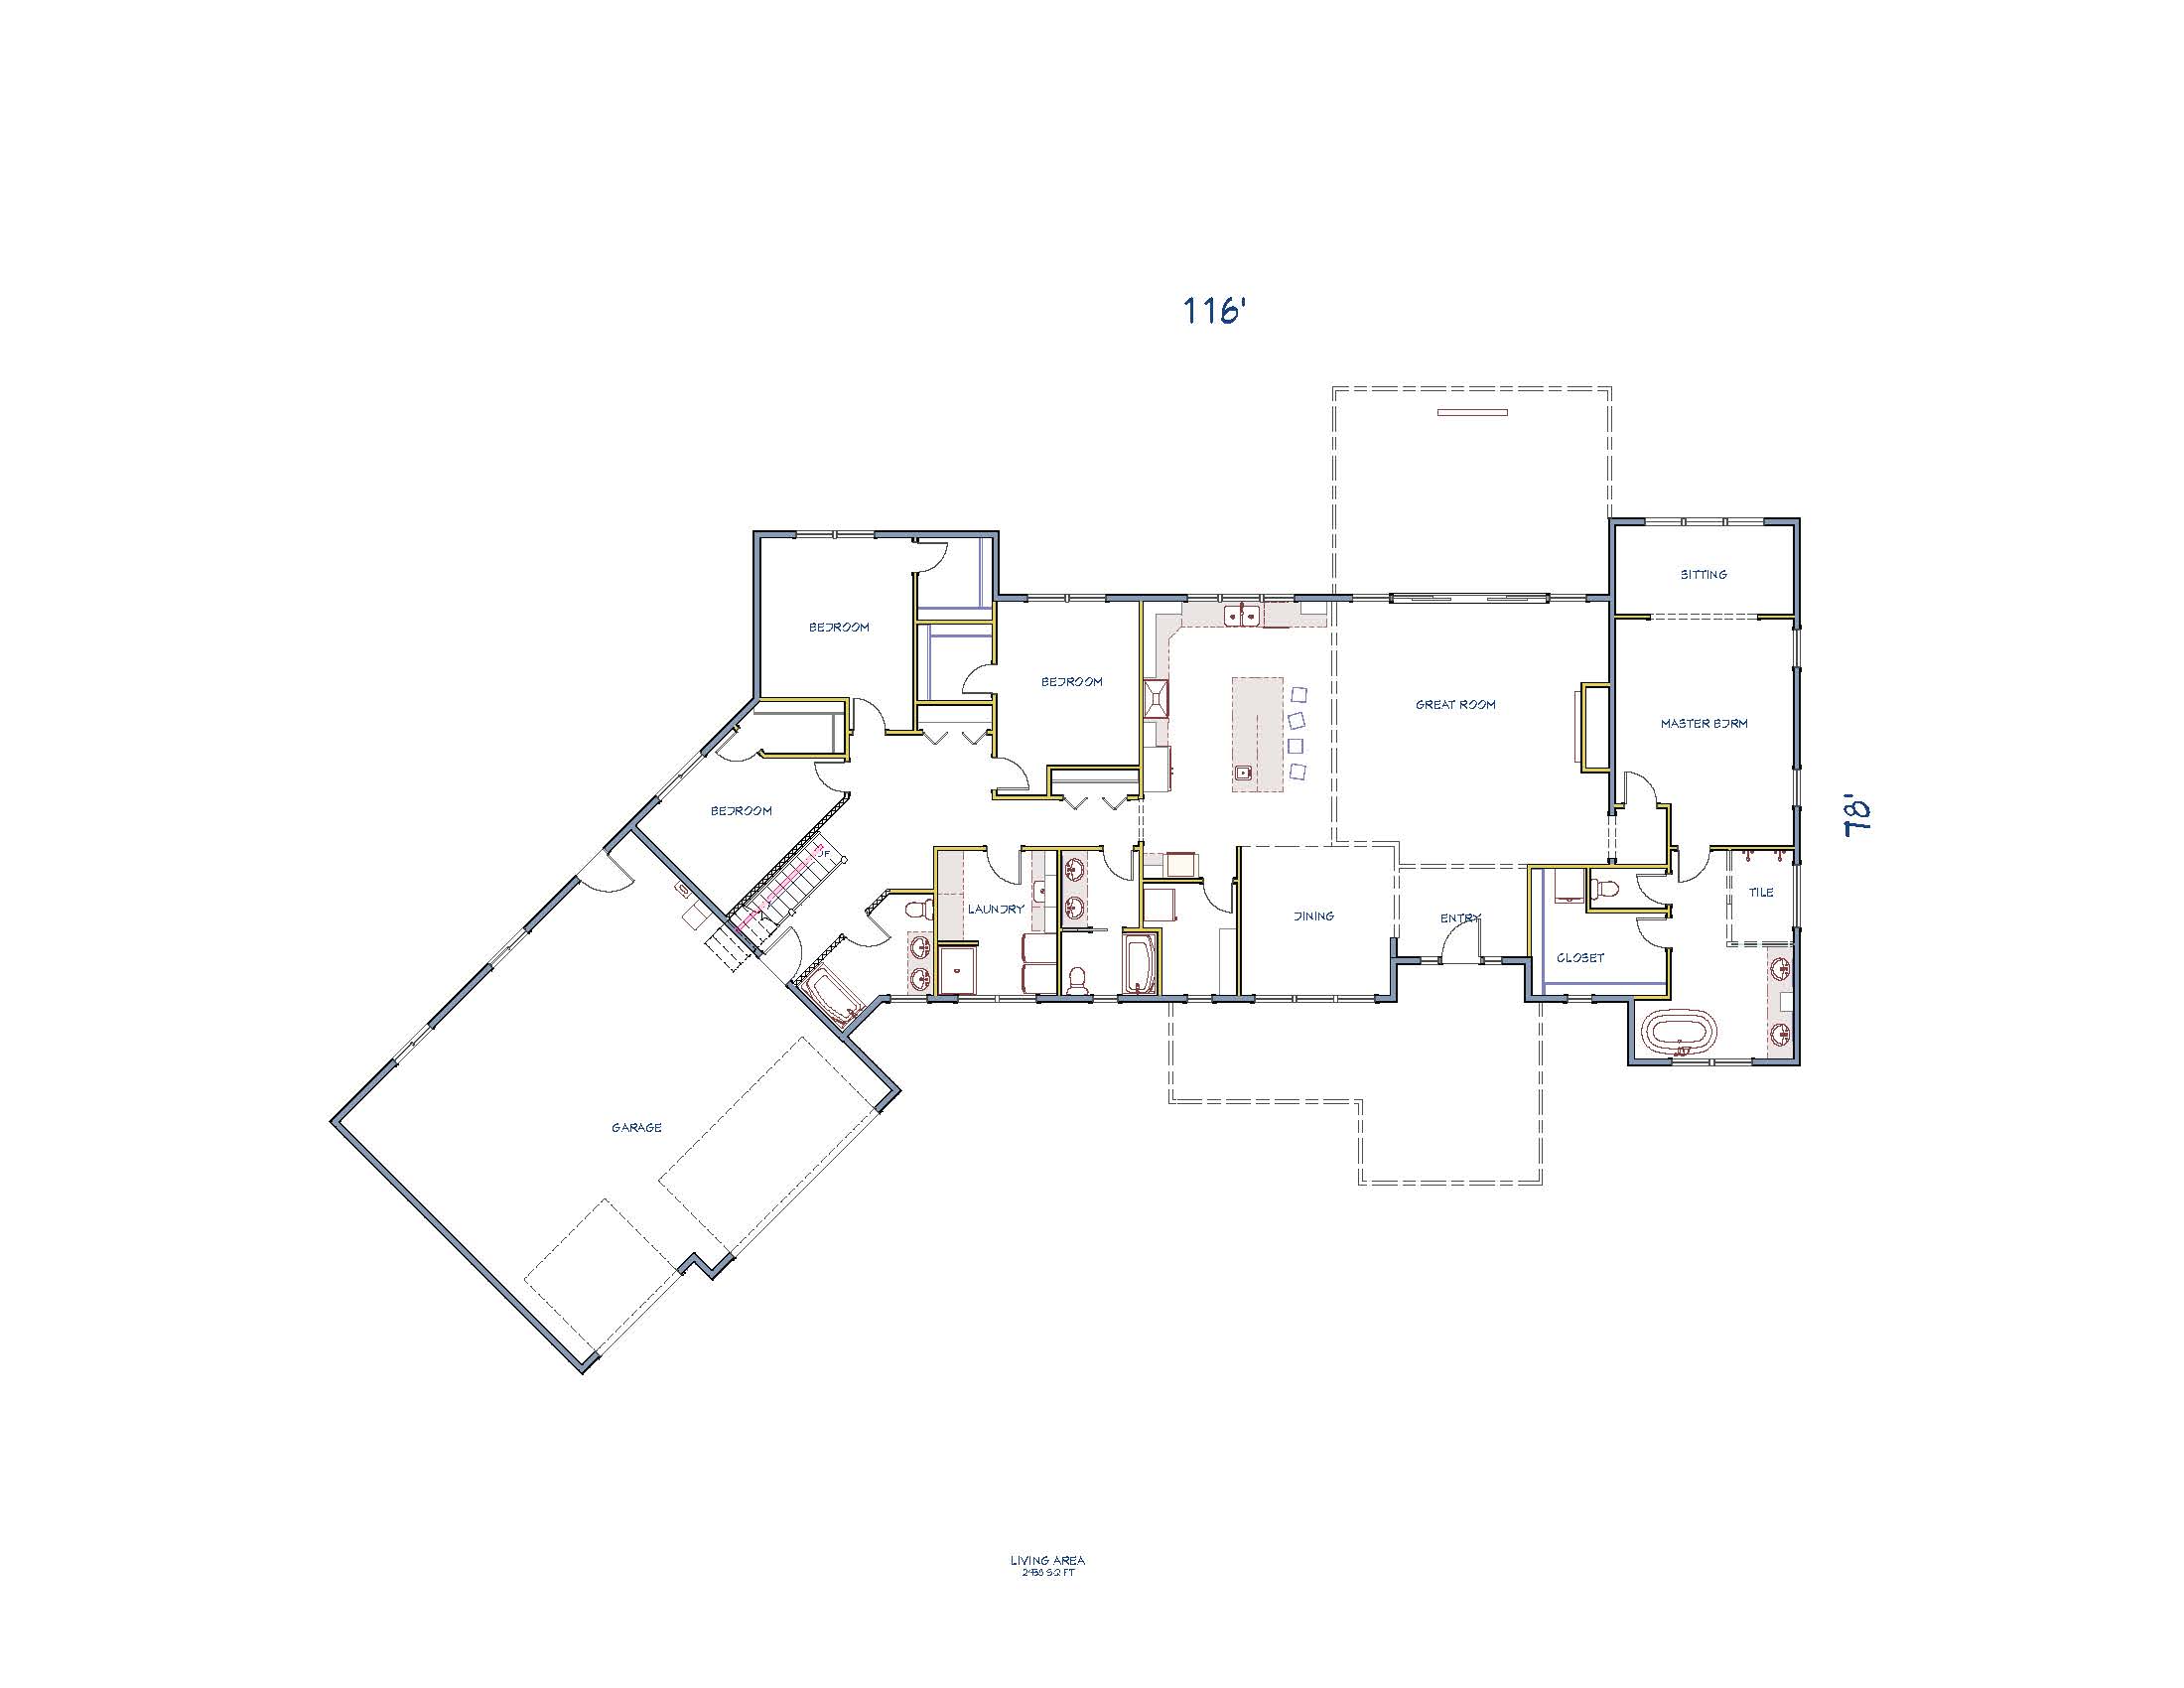 Floor plan for a modern custom home by Design NW